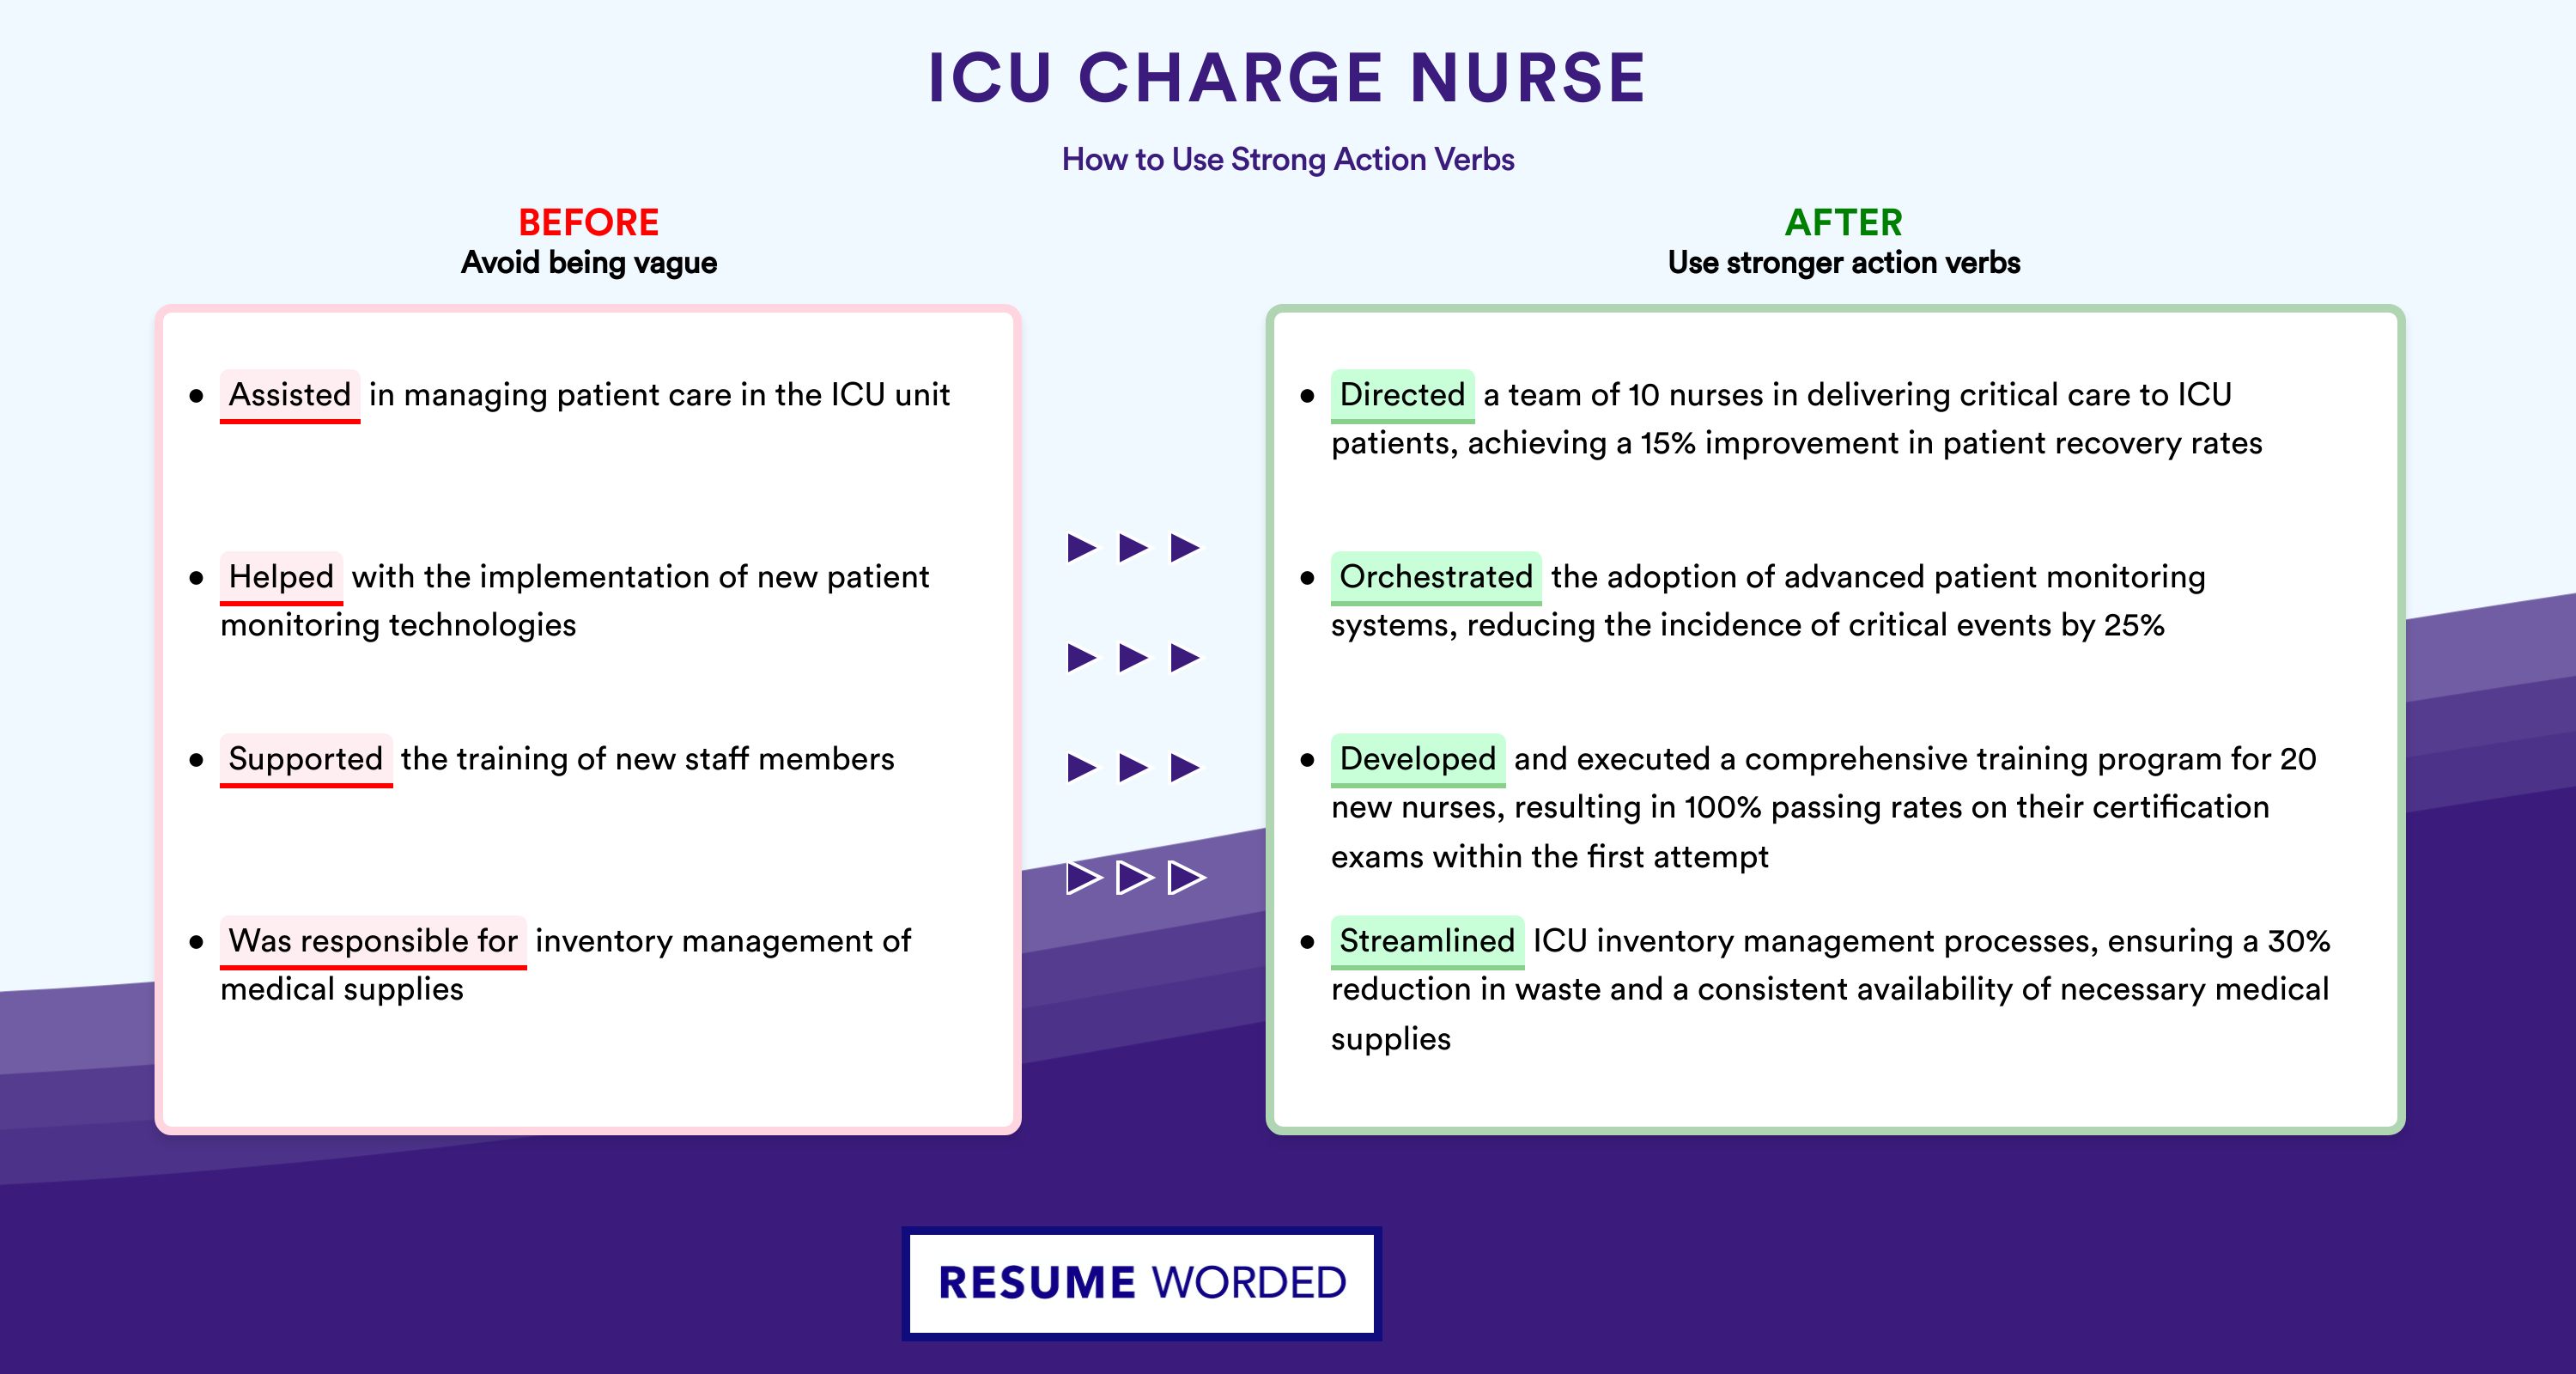 Action Verbs for ICU Charge Nurse